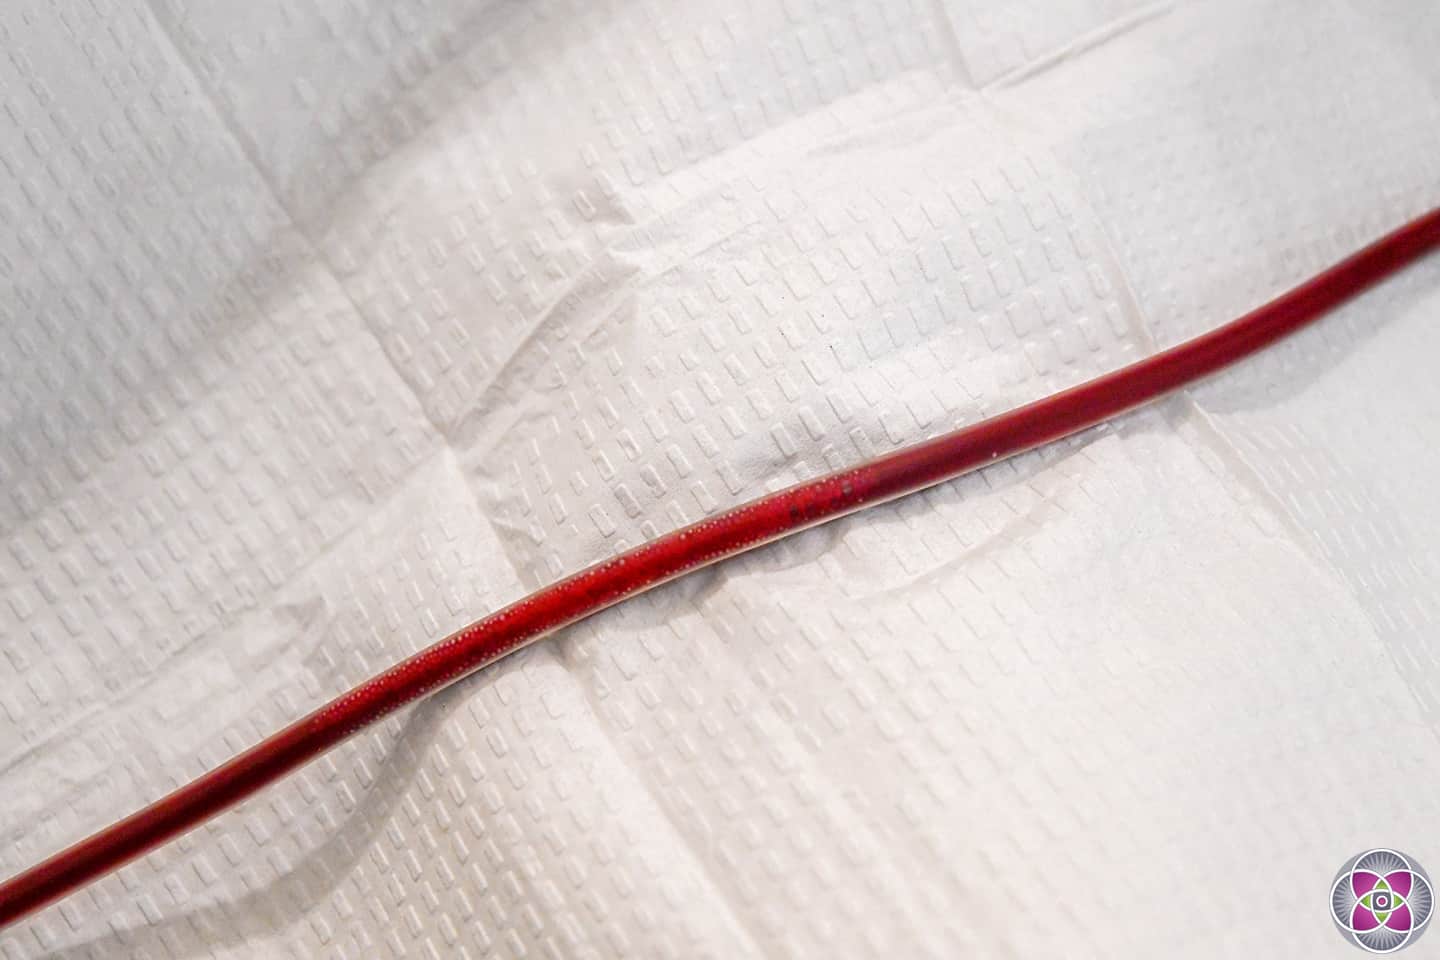 During an EBOO treatment you can see i the IV line all the "gunk" that will be captured by the filter before the purified and ozone infused clean blood in returned to the Long COVID patient.